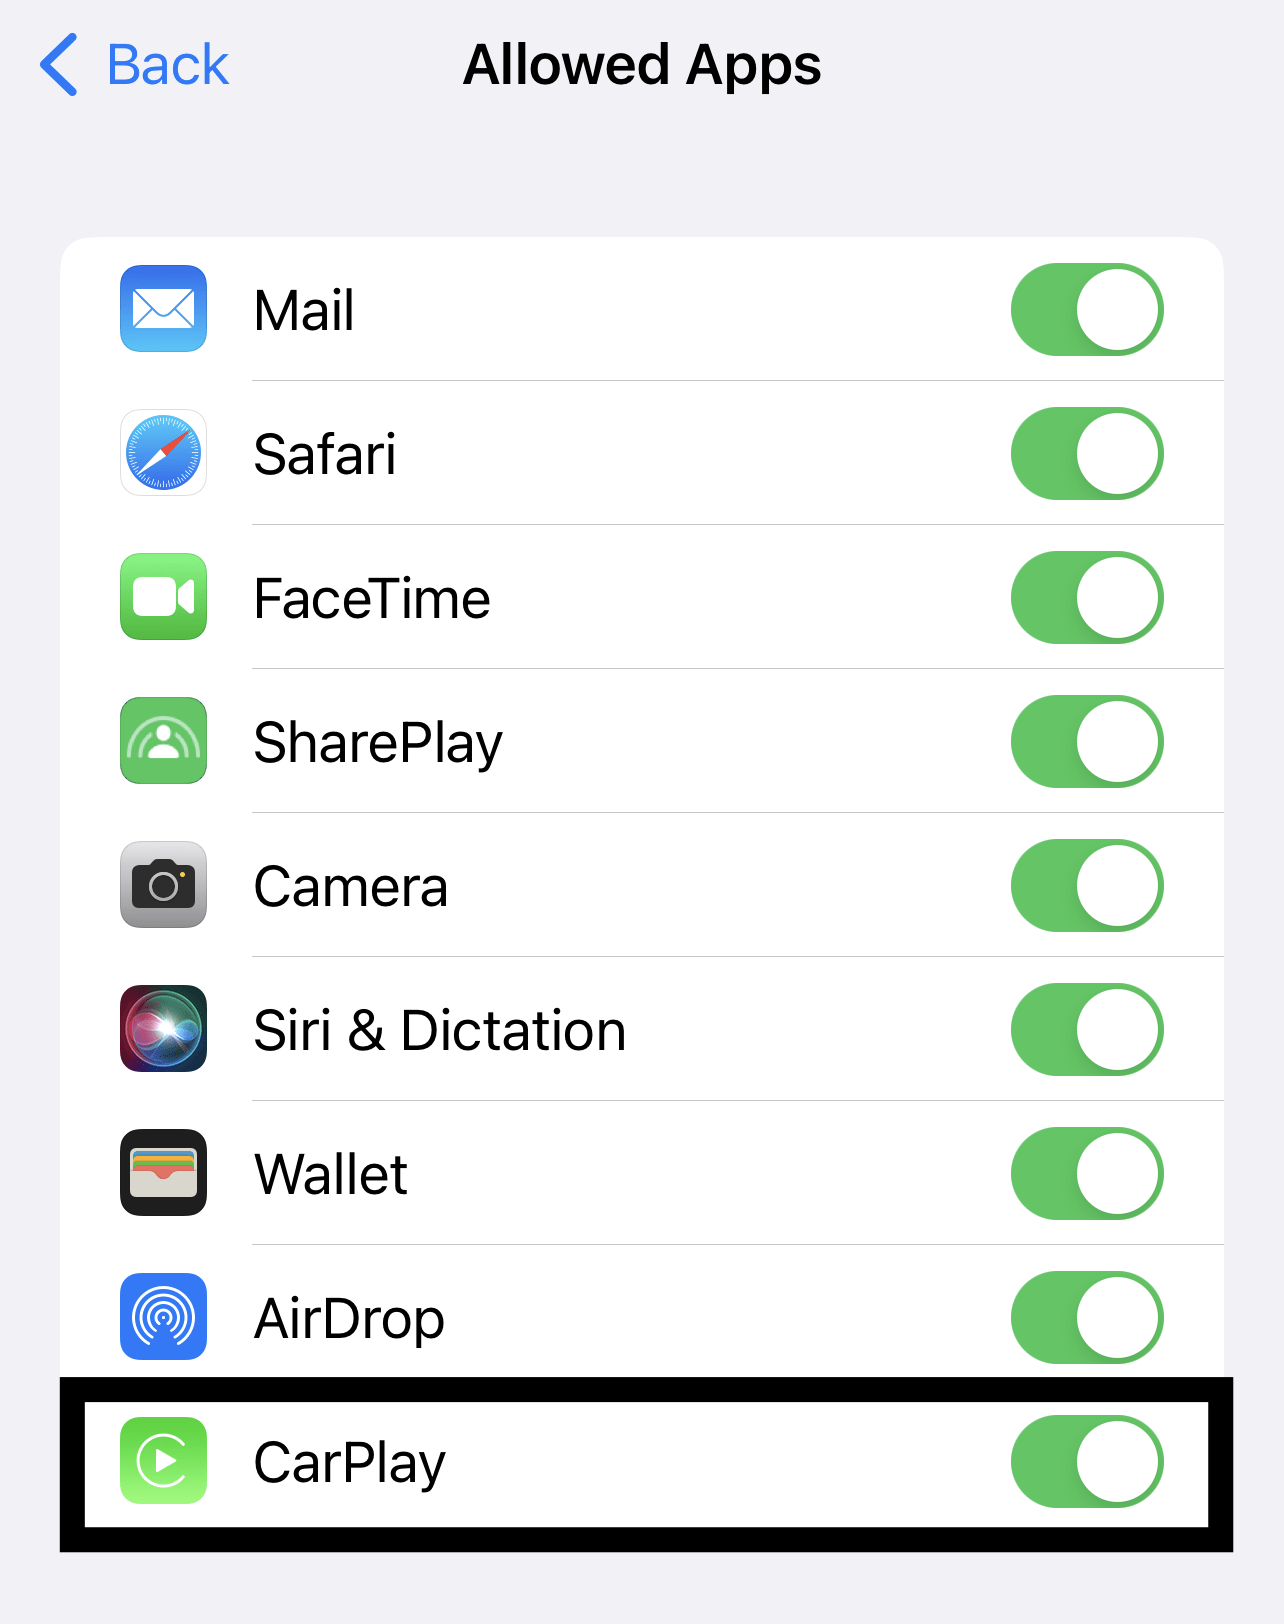 check screen time restriction settings to ensure carplay is not restricted to fix the "Unable to Connect Apple Carplay" error